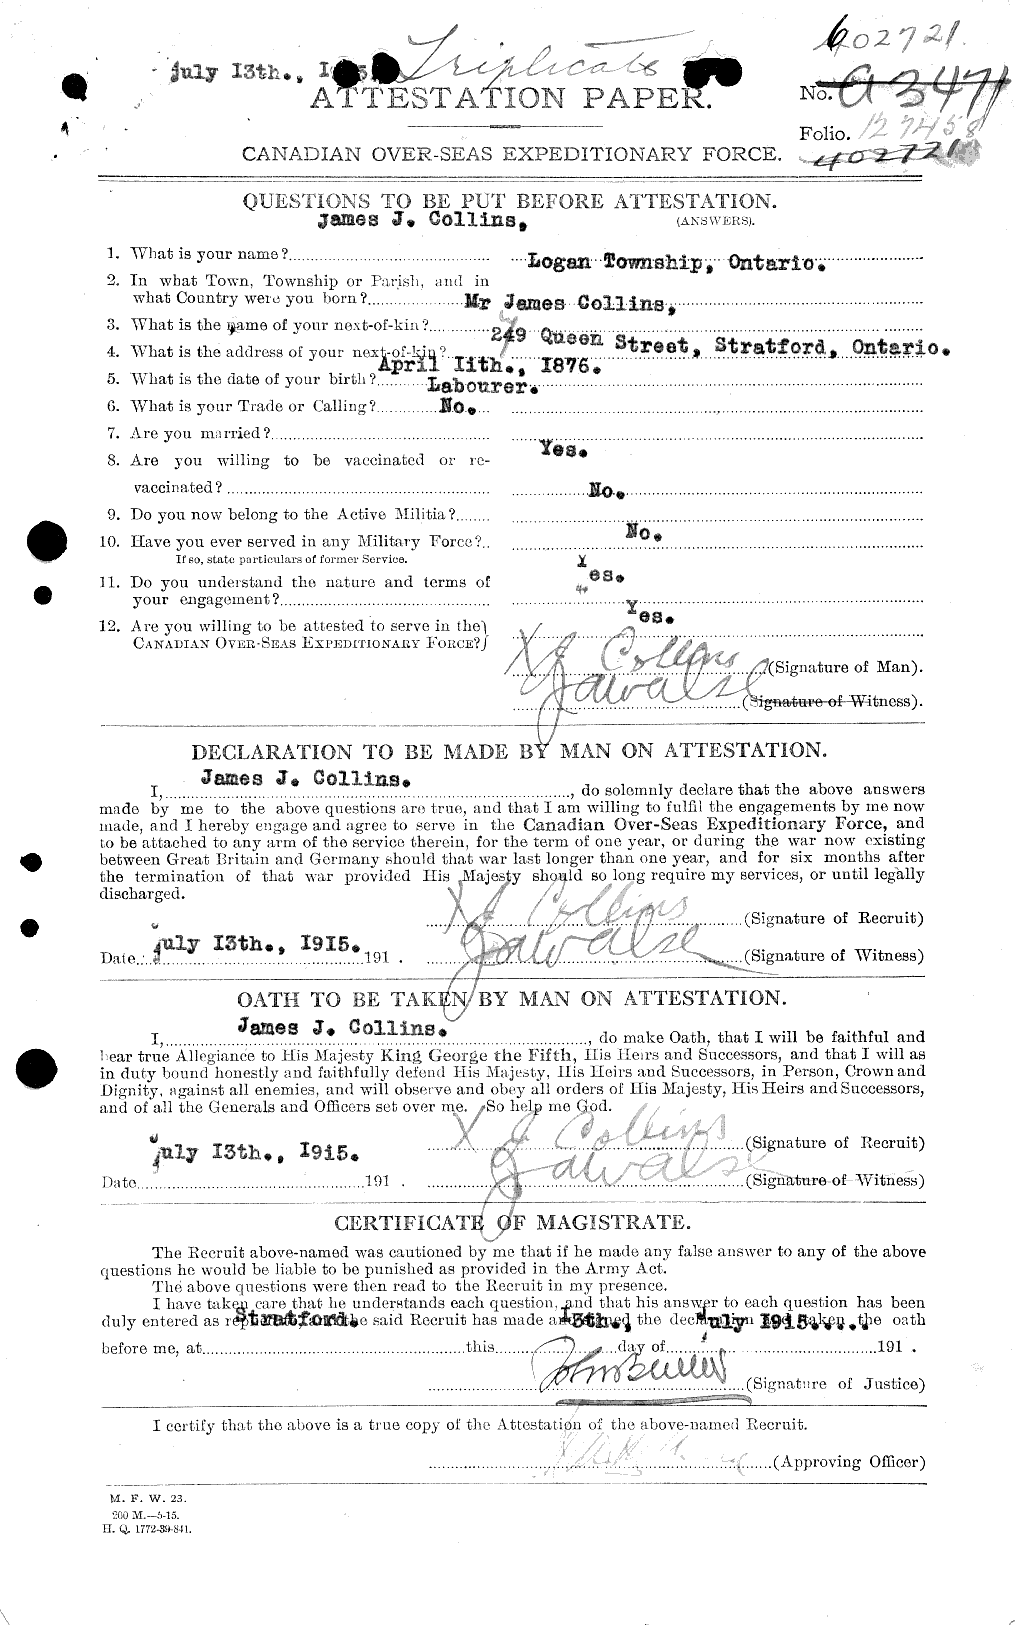 Personnel Records of the First World War - CEF 037938a